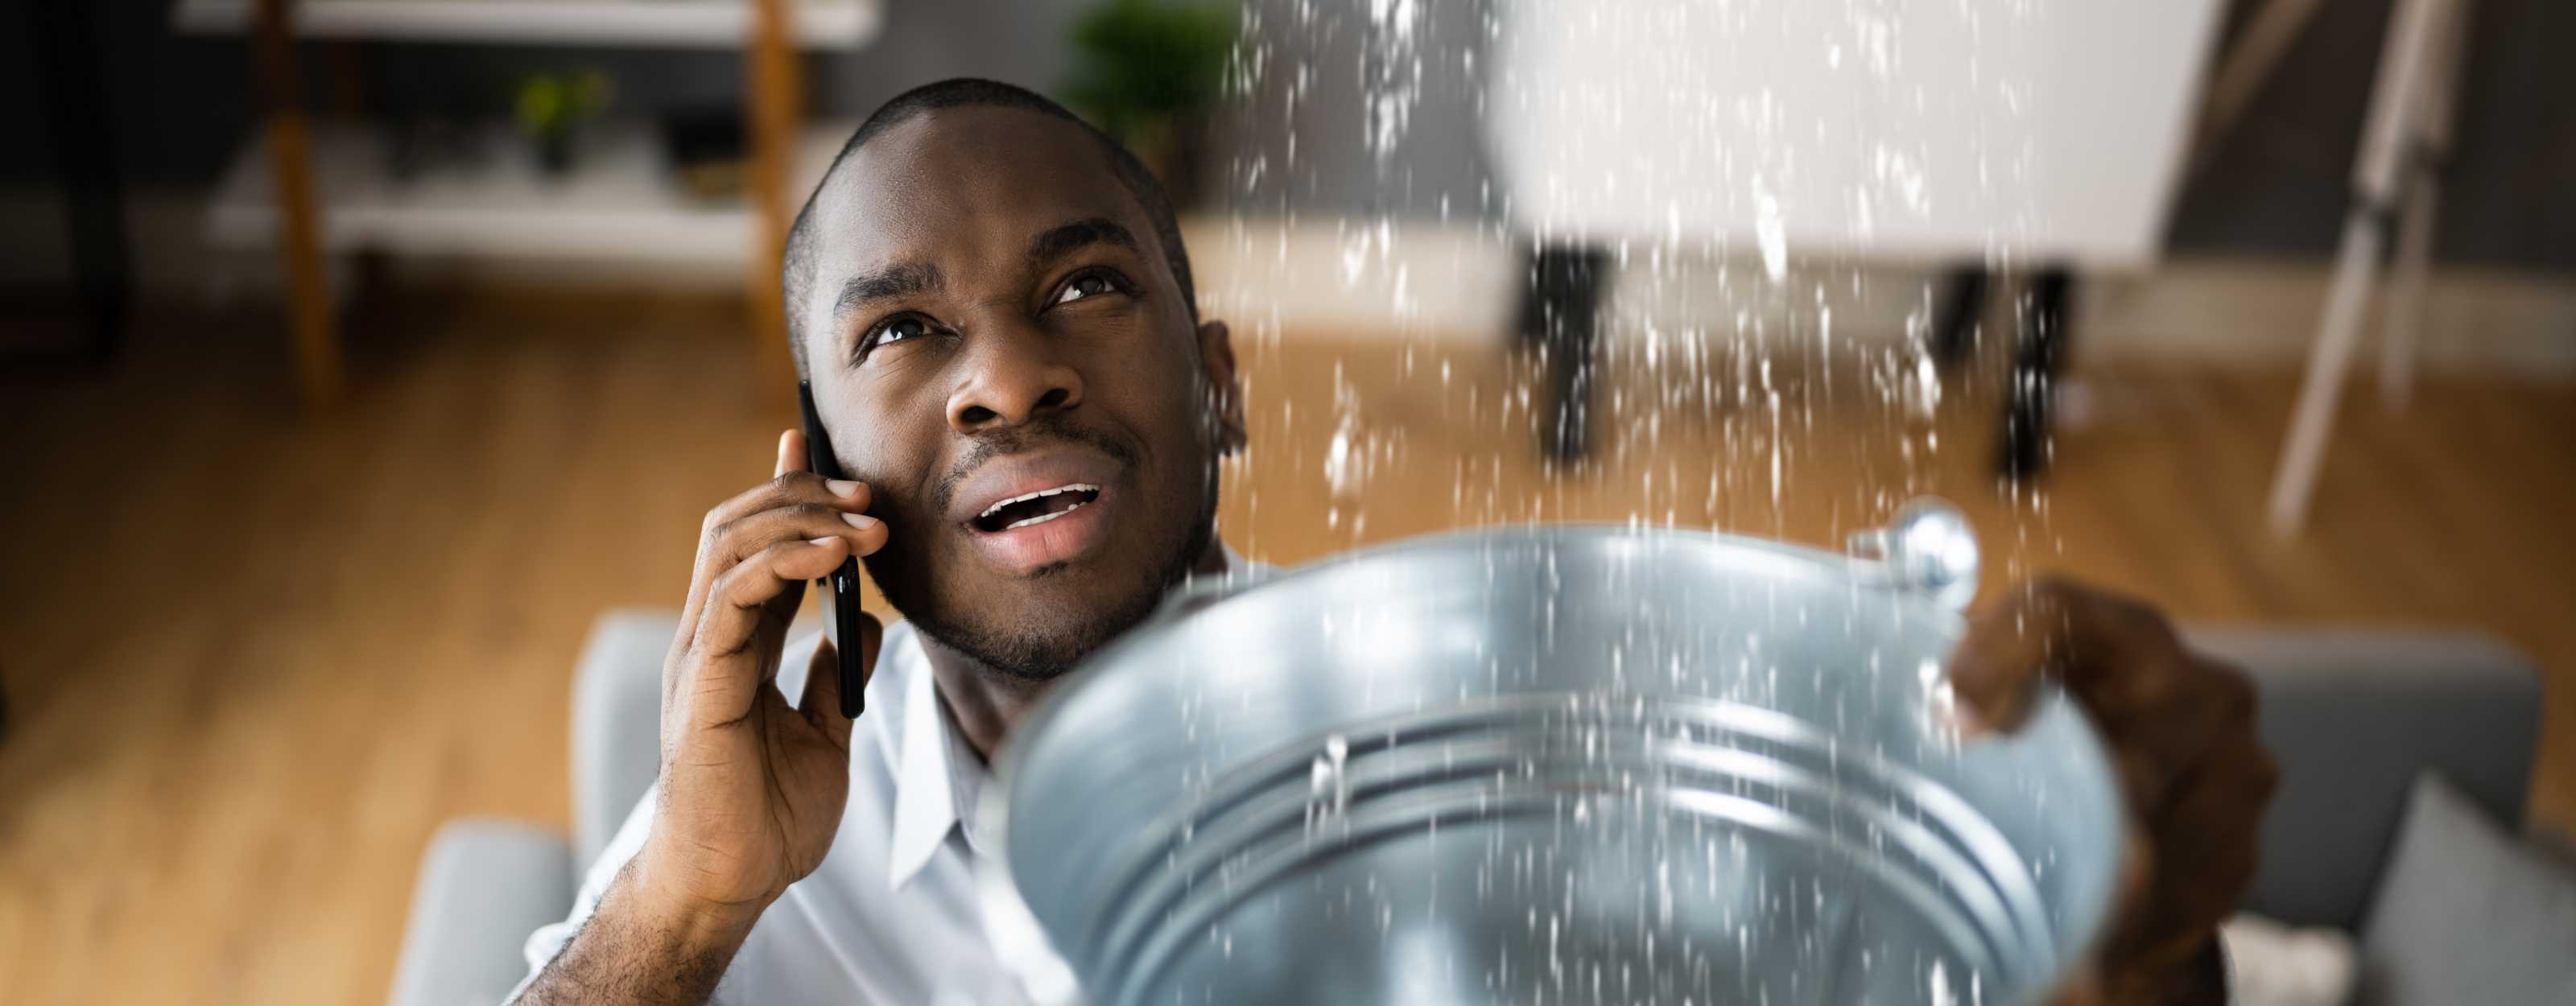 a man with a bucket flling up with water from a leak on the phone